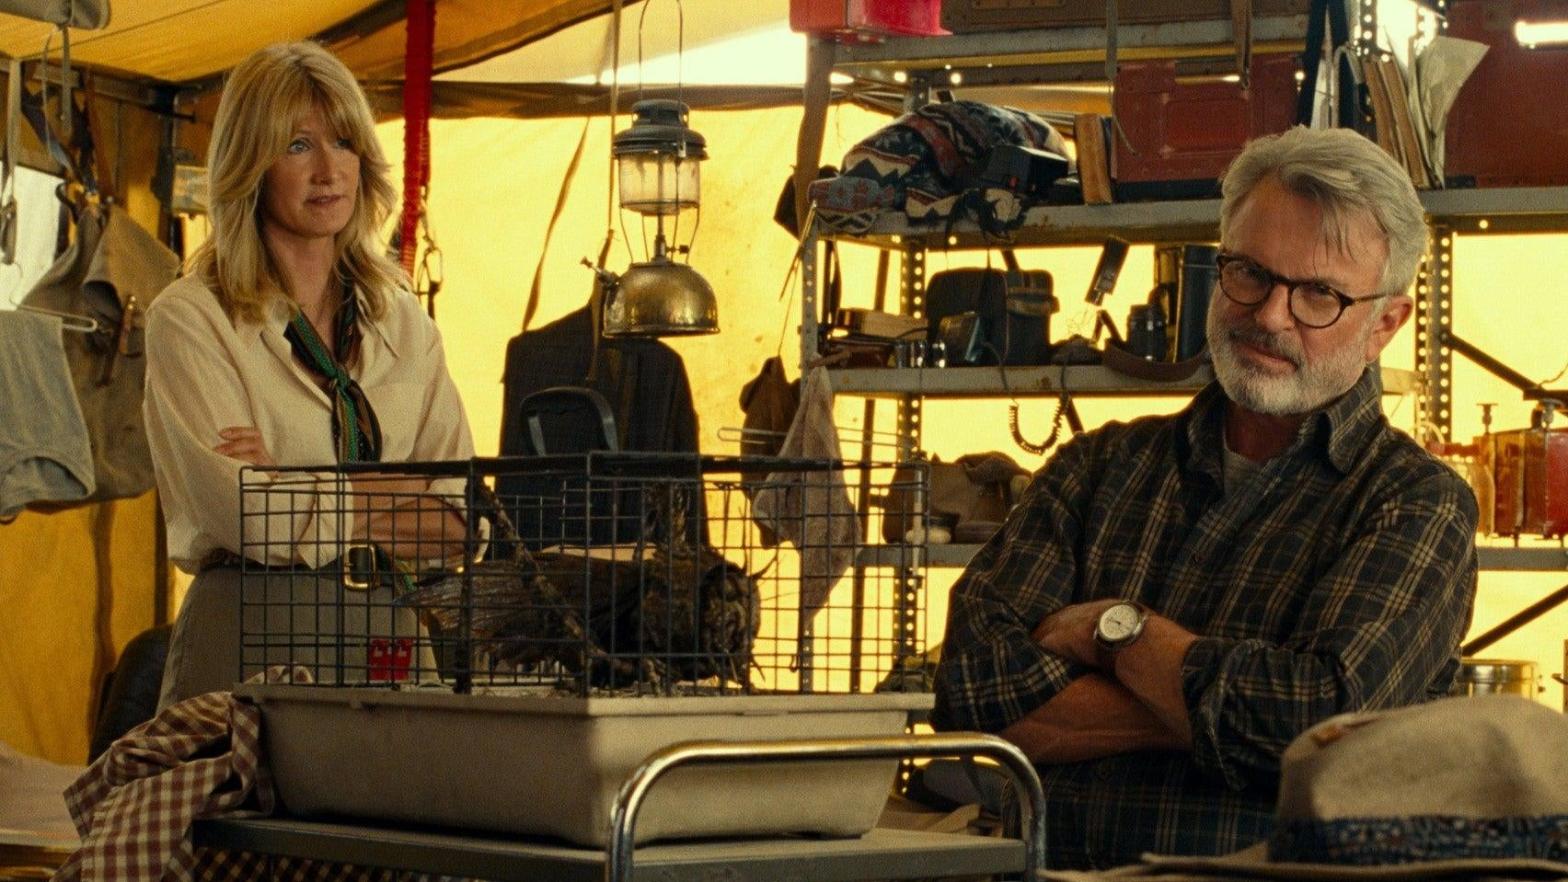 Neill and Dern in the new film. (Image: Universal)